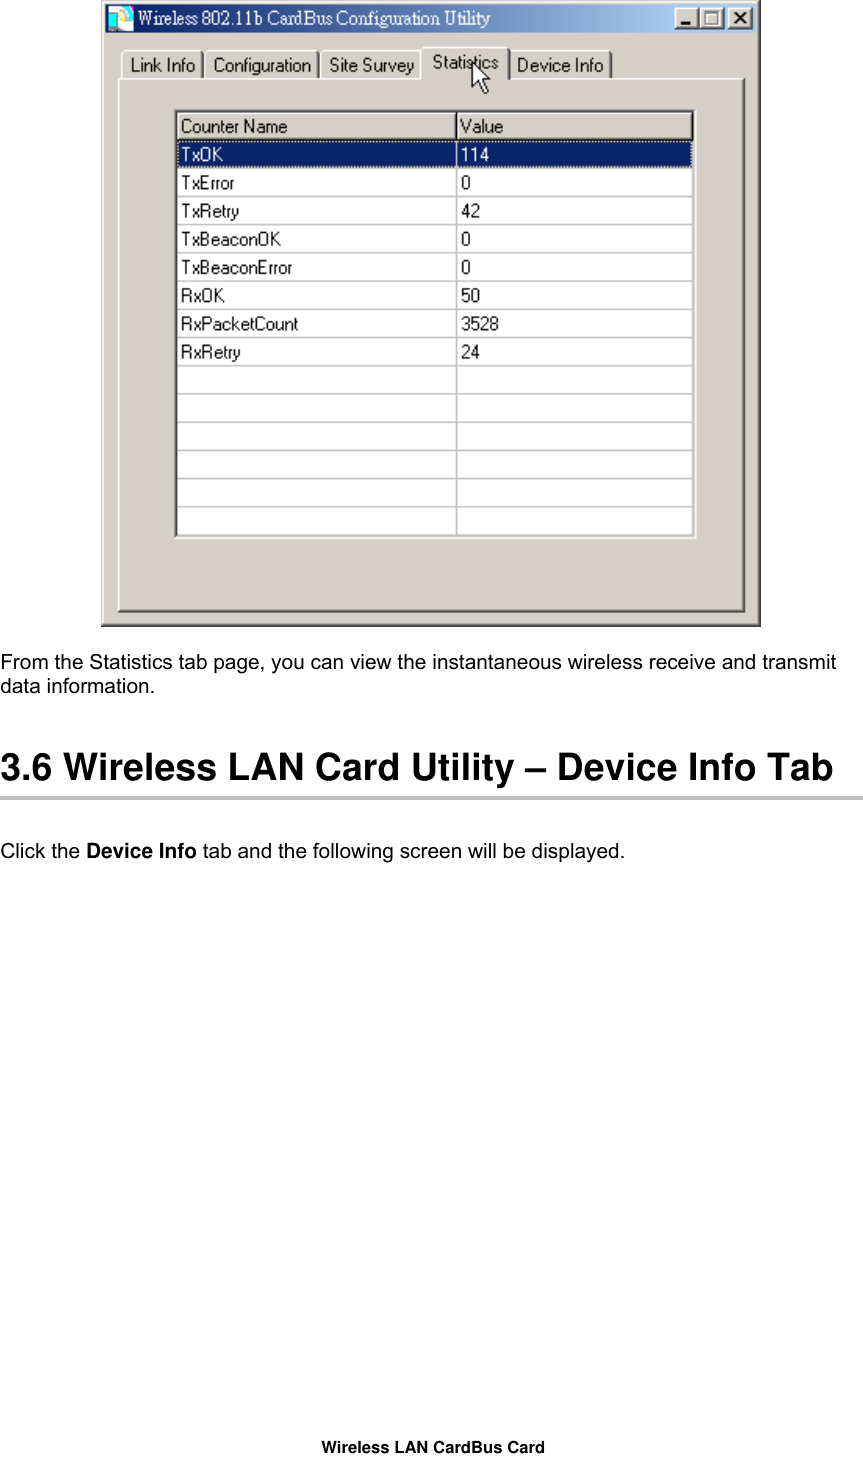   From the Statistics tab page, you can view the instantaneous wireless receive and transmit data information.     3.6 Wireless LAN Card Utility – Device Info Tab   Click the Device Info tab and the following screen will be displayed.   Wireless LAN CardBus Card 